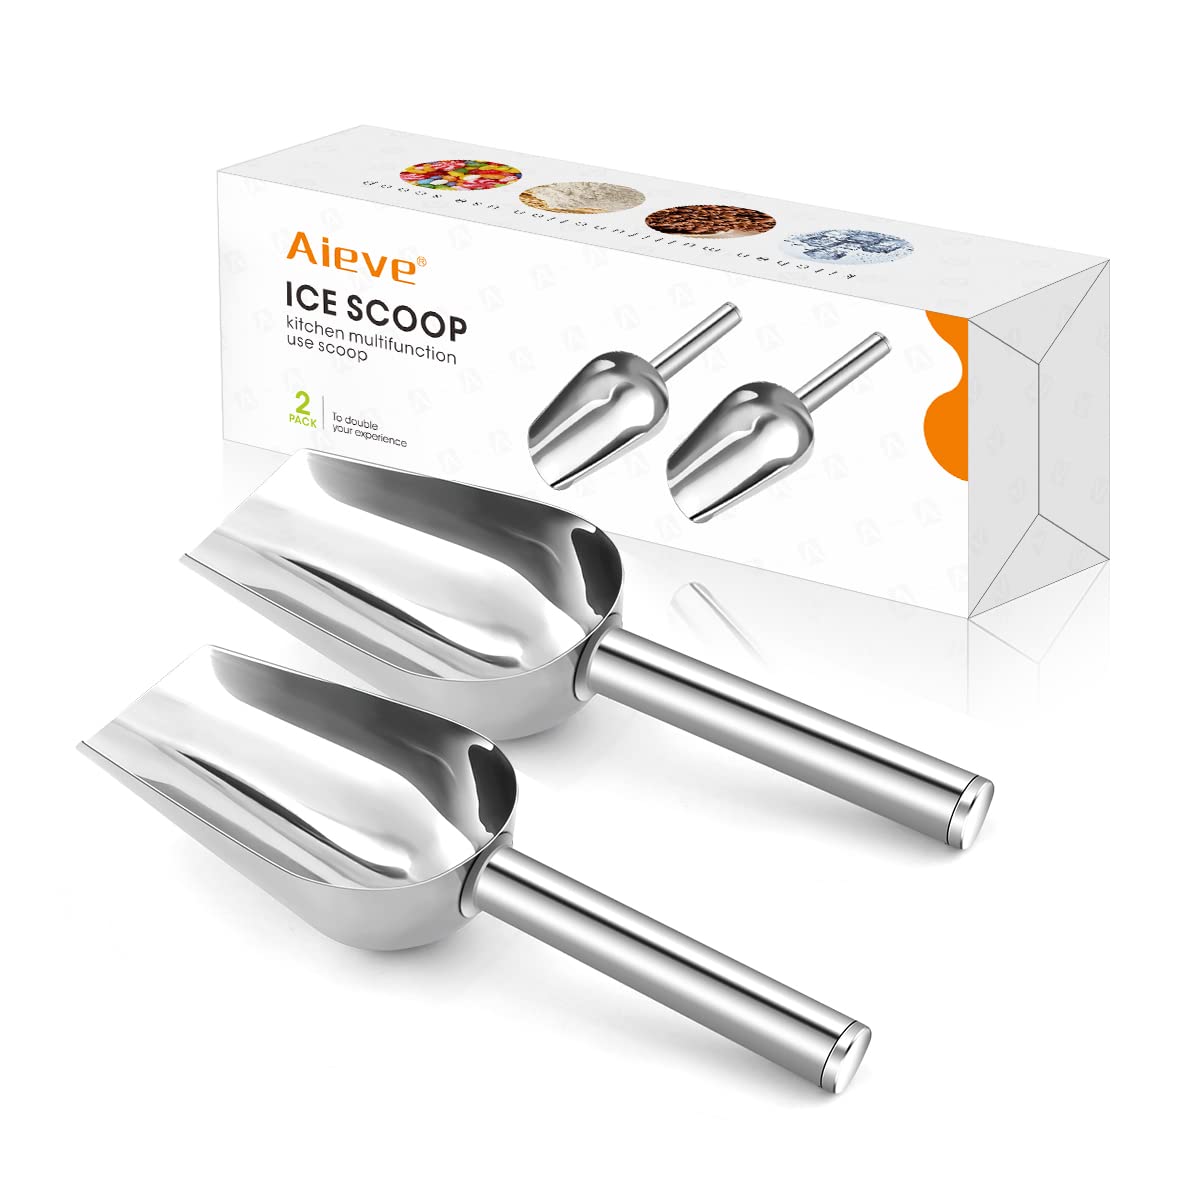  multi-functional kitchen tools- Tea bag tongs can be used as clip, also as tea bag strainer for tea bags, ice cubes and coffee